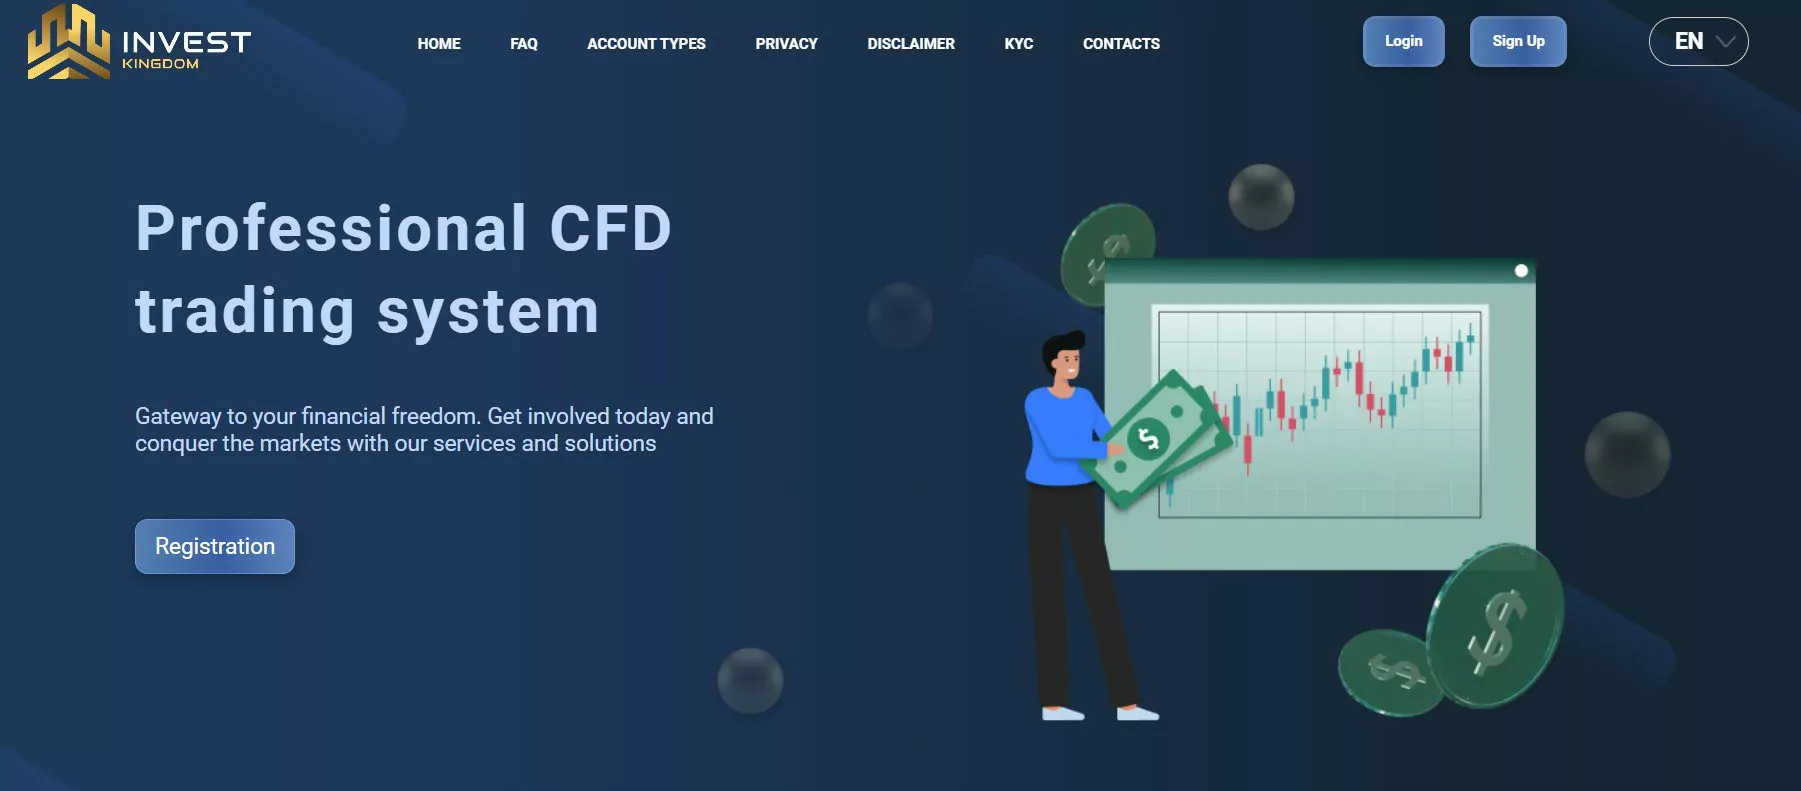 CFD Invest kingdom CO